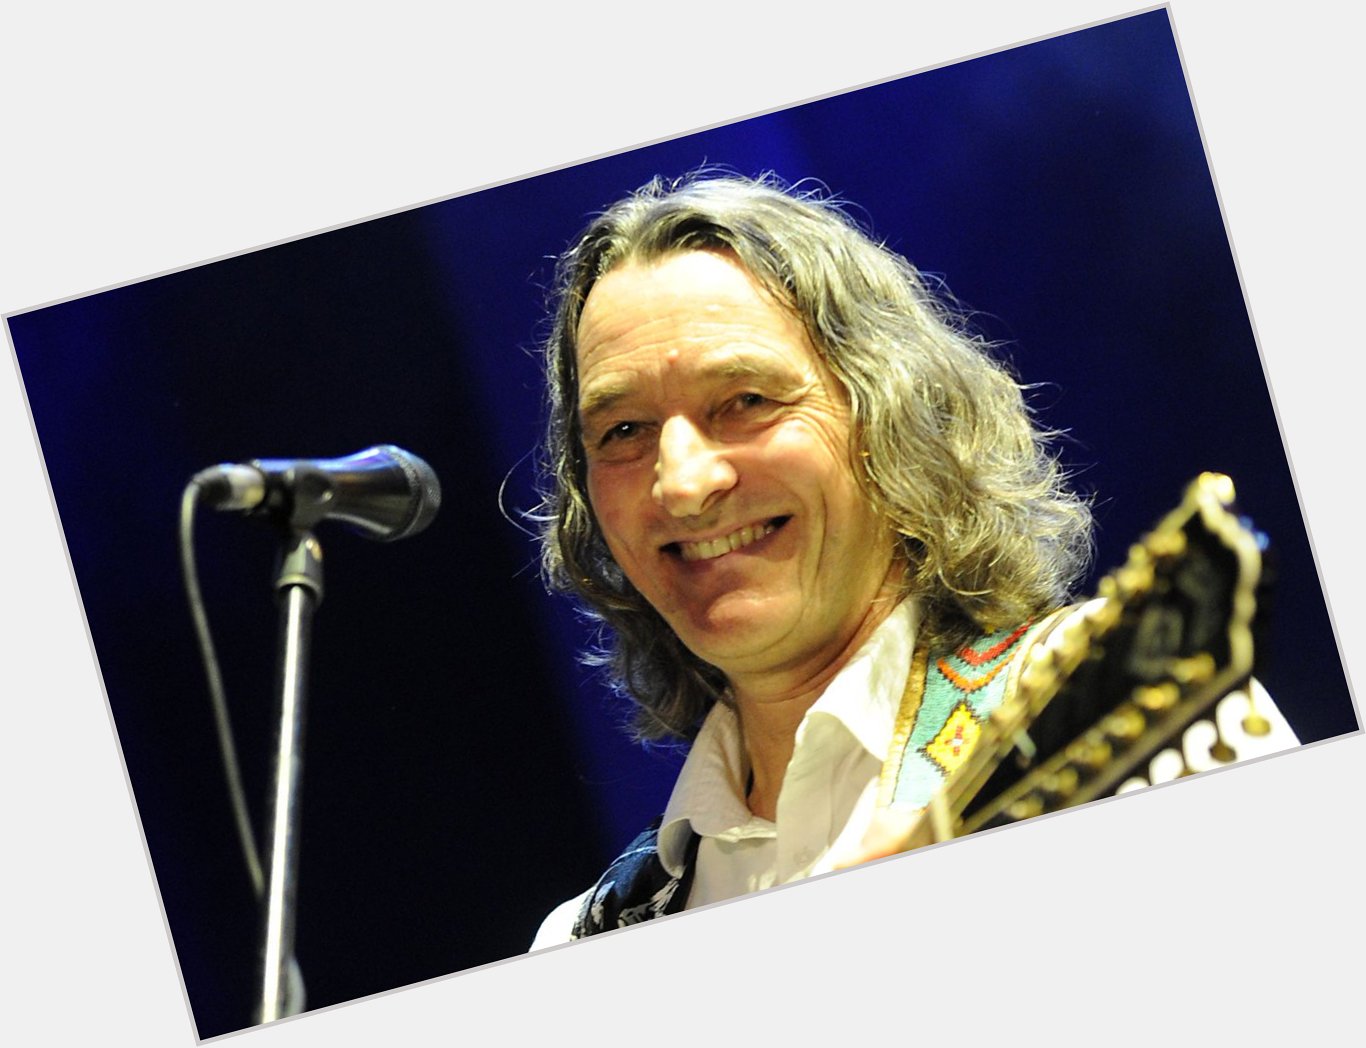 A Big BOSS Happy Birthday to Roger Hodgson formerly of Supertramp from all of us at Boss Boss Radio. 